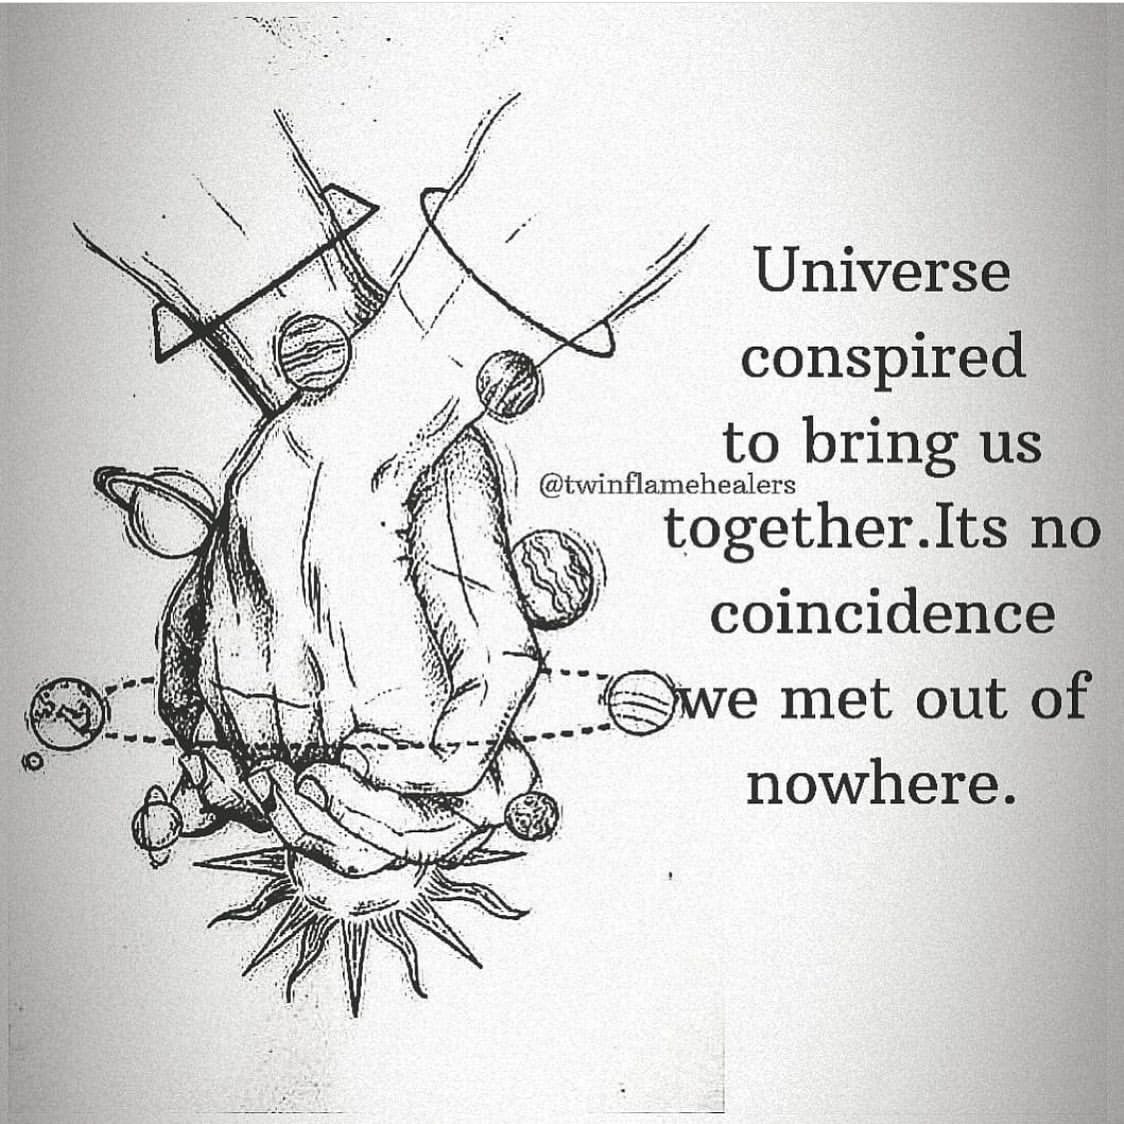 Universe conspired to bring us together. Its no coincidence, we met out of nowhere.